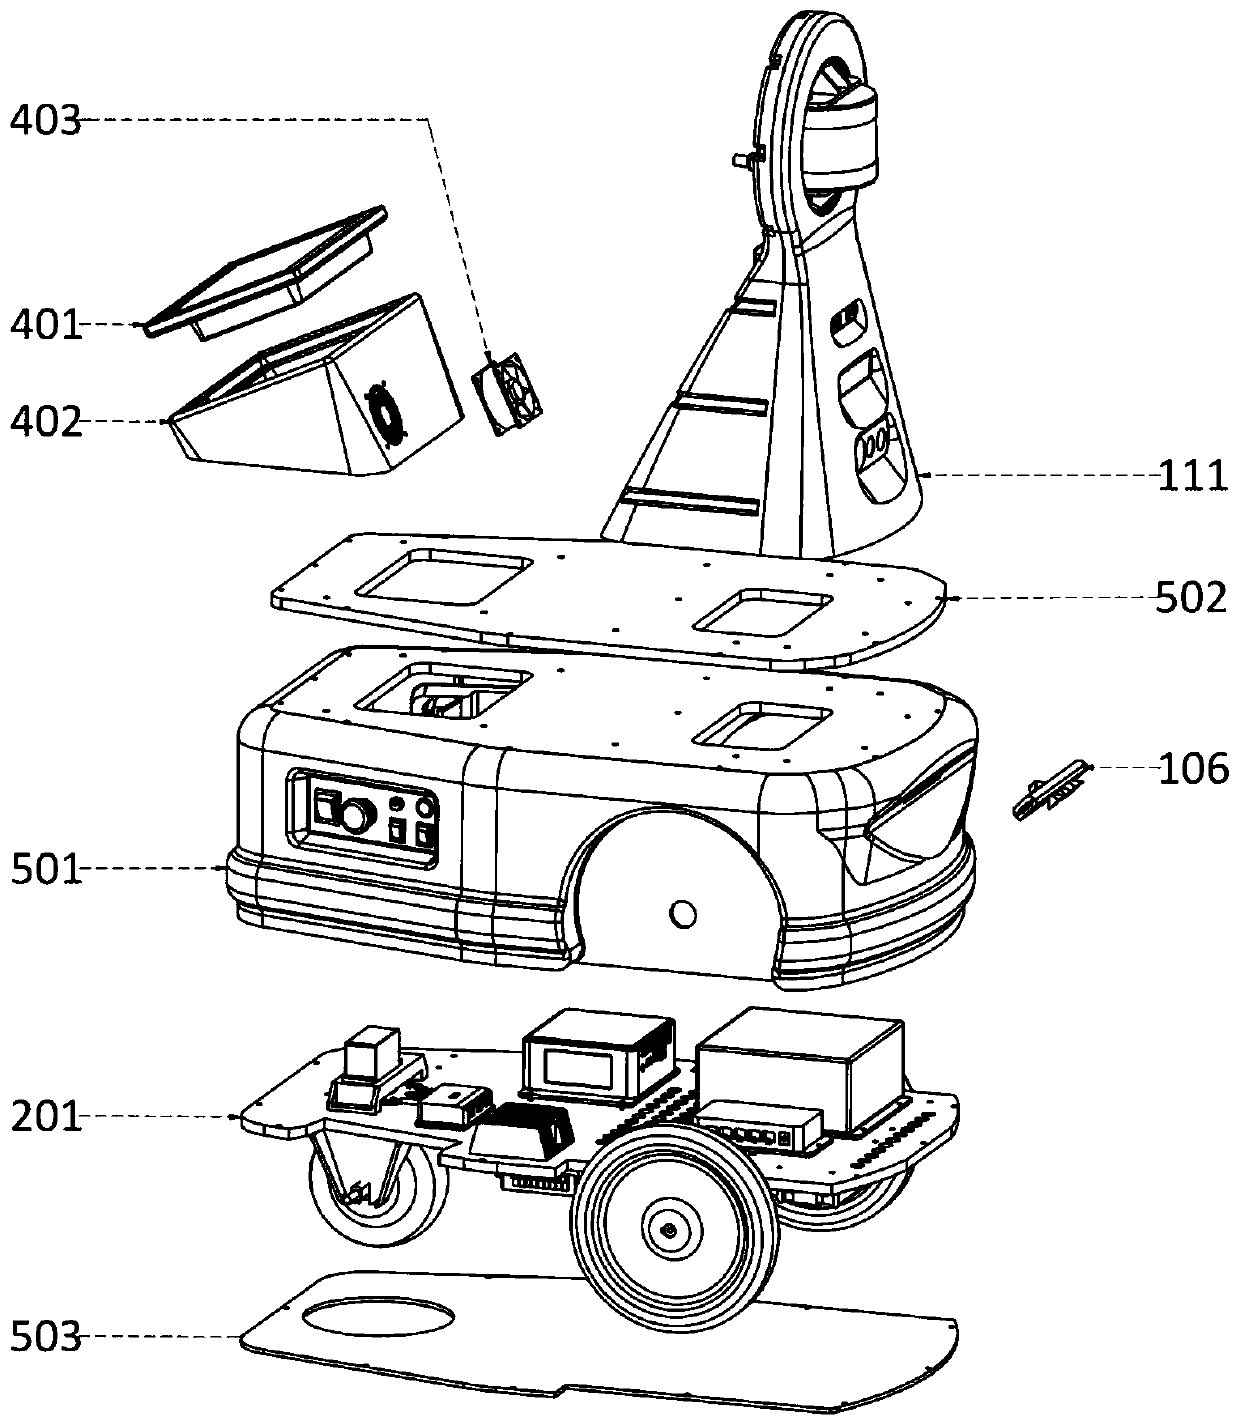 Rotary laser radar and SLAM robot for indoor map construction and positioning